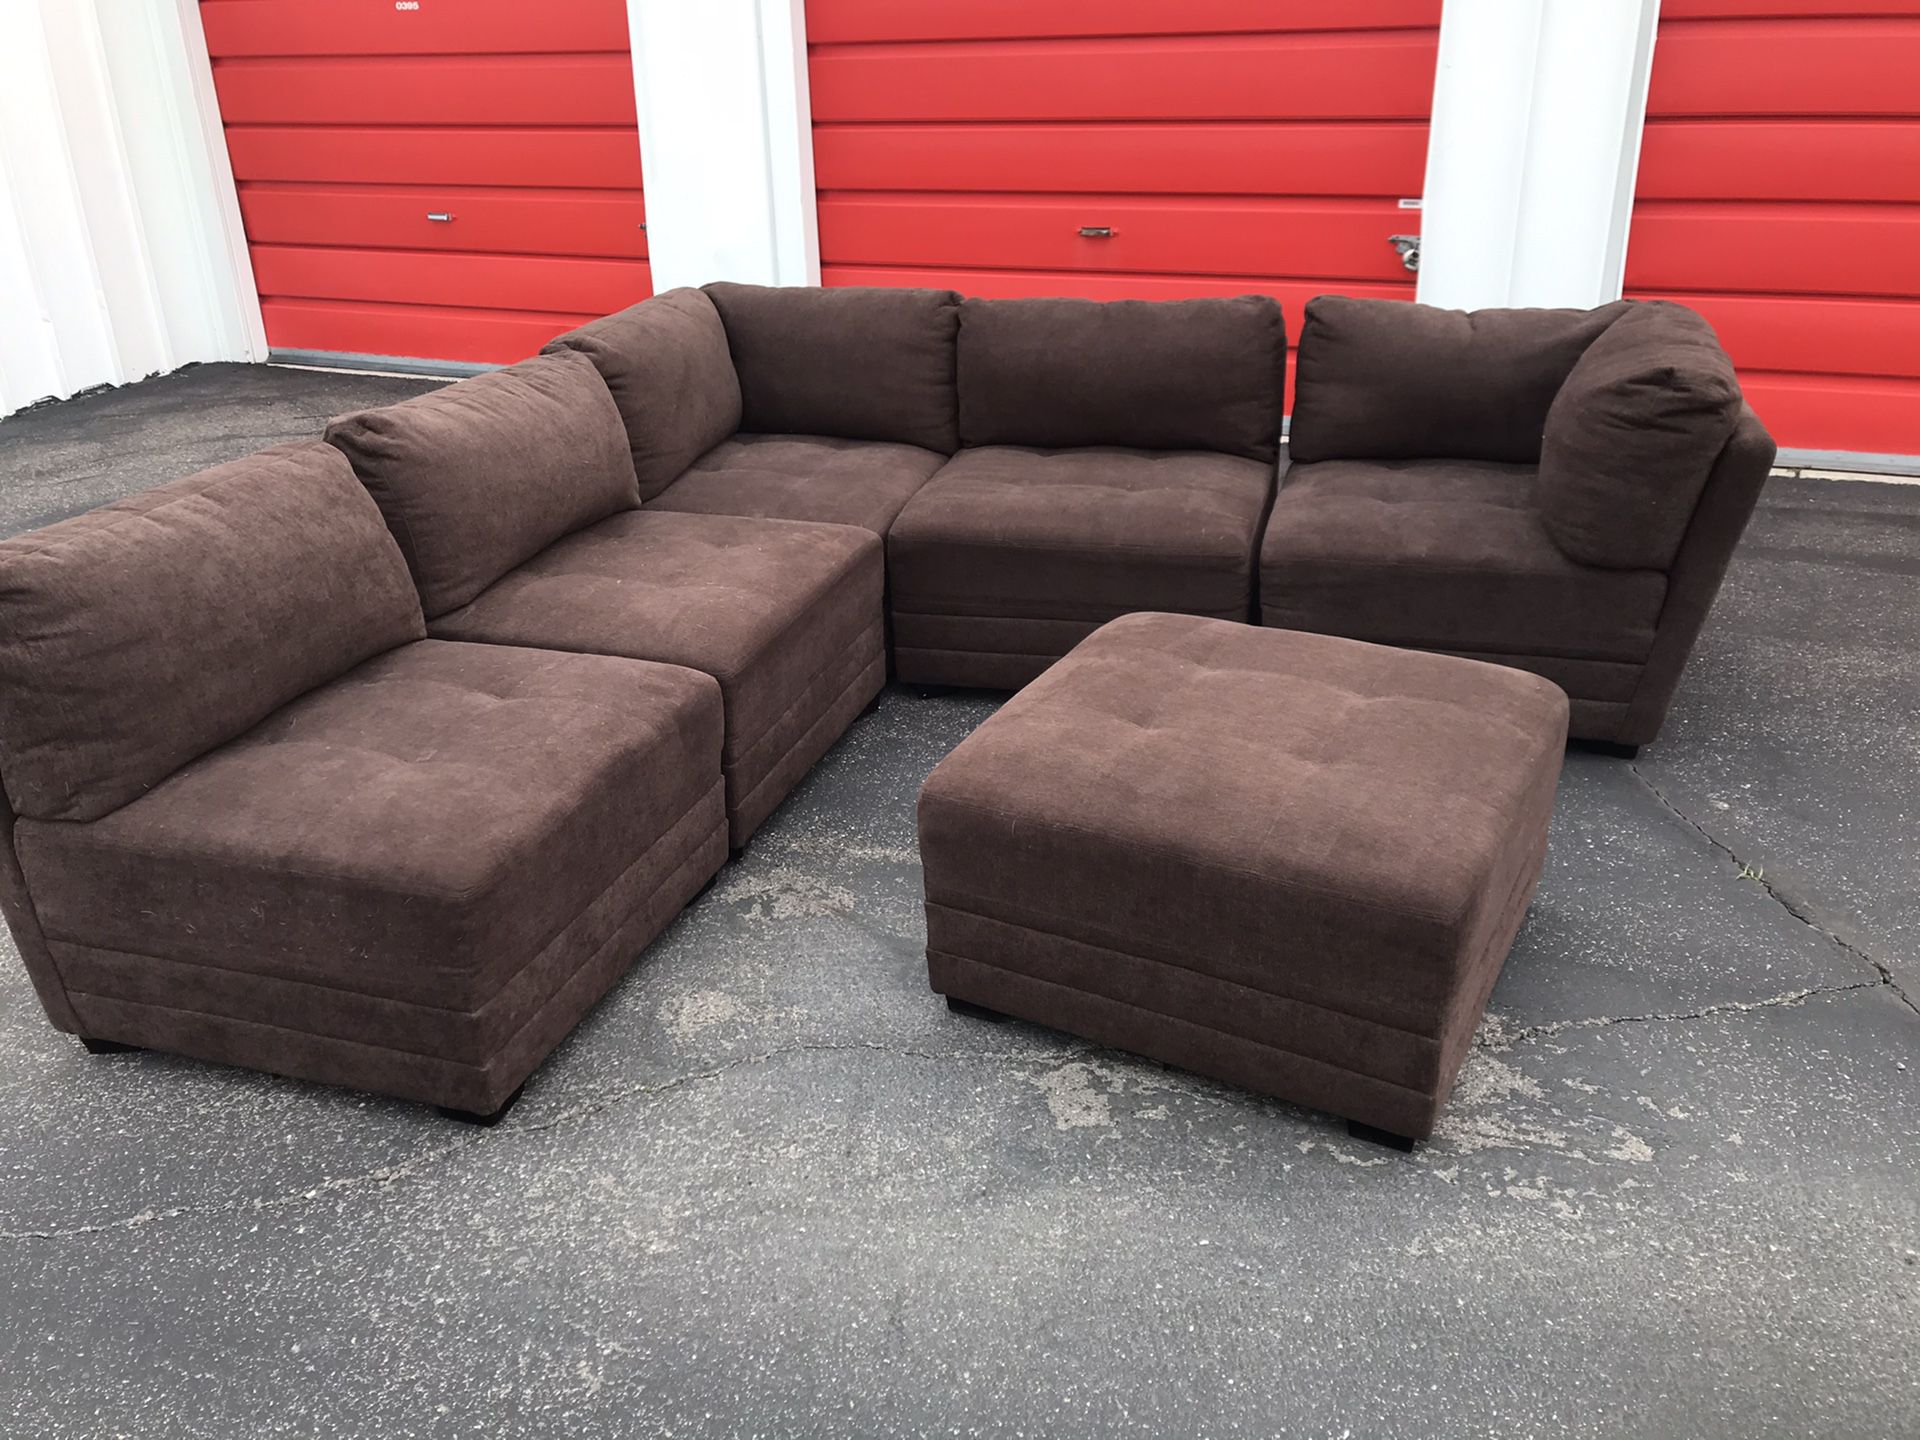 Comfortable sectional couch 6 pieces with ottoman living room